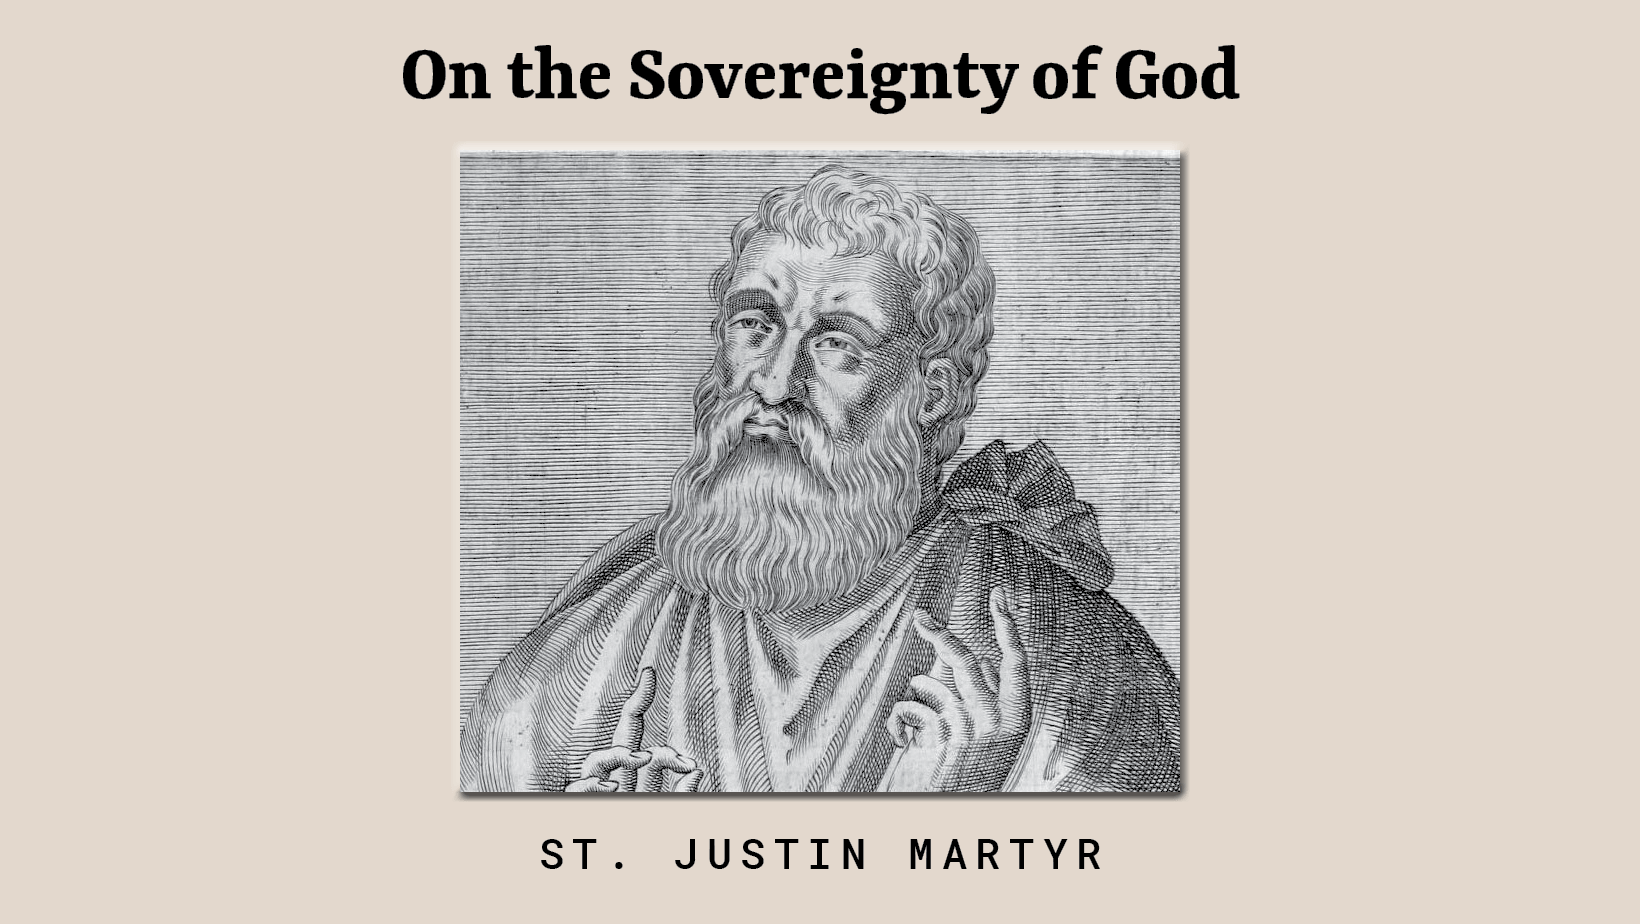 On the sovereignty of god by st. justin martyr